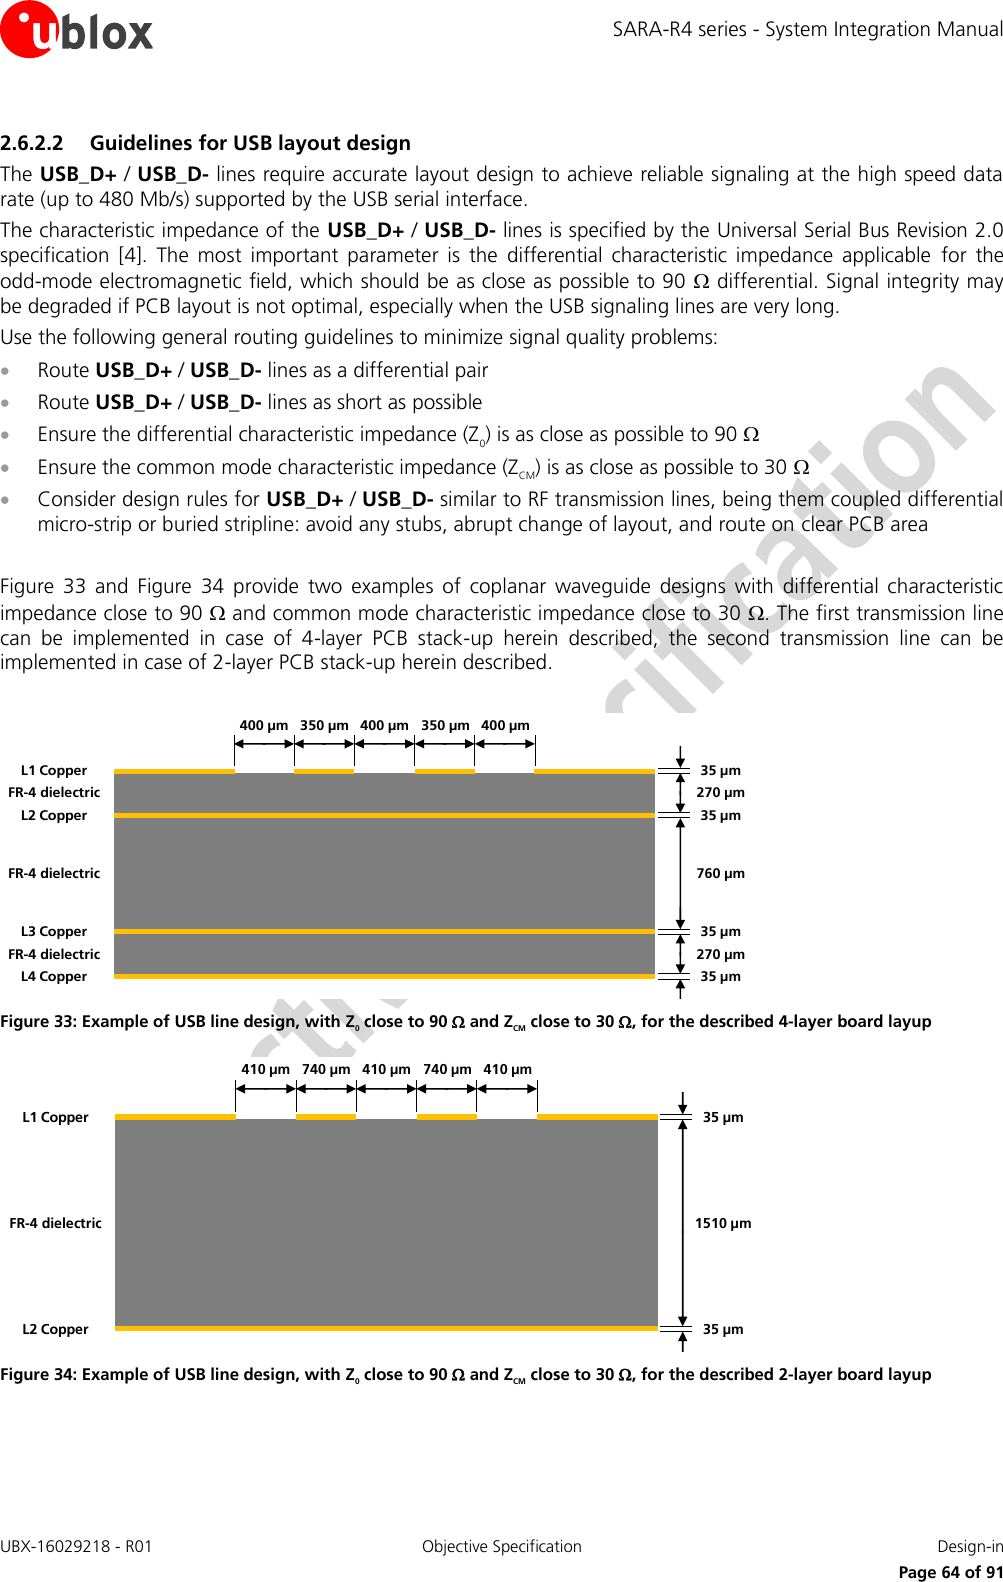 SARA-R4 series - System Integration Manual UBX-16029218 - R01  Objective Specification  Design-in     Page 64 of 91 2.6.2.2 Guidelines for USB layout design The USB_D+ / USB_D- lines require accurate layout design to achieve reliable signaling at the high speed data rate (up to 480 Mb/s) supported by the USB serial interface.  The characteristic impedance of the USB_D+ / USB_D- lines is specified by the Universal Serial Bus Revision 2.0 specification  [4].  The  most  important  parameter  is  the  differential  characteristic  impedance  applicable  for  the odd-mode electromagnetic field, which should be as close as possible to 90  differential. Signal integrity may be degraded if PCB layout is not optimal, especially when the USB signaling lines are very long. Use the following general routing guidelines to minimize signal quality problems:  Route USB_D+ / USB_D- lines as a differential pair  Route USB_D+ / USB_D- lines as short as possible  Ensure the differential characteristic impedance (Z0) is as close as possible to 90   Ensure the common mode characteristic impedance (ZCM) is as close as possible to 30   Consider design rules for USB_D+ / USB_D- similar to RF transmission lines, being them coupled differential micro-strip or buried stripline: avoid any stubs, abrupt change of layout, and route on clear PCB area  Figure  33  and  Figure  34  provide  two  examples  of  coplanar  waveguide  designs  with  differential  characteristic impedance close to 90  and common mode characteristic impedance close to 30 . The first transmission line can  be  implemented  in  case  of  4-layer  PCB  stack-up  herein  described,  the  second  transmission  line  can  be implemented in case of 2-layer PCB stack-up herein described.  35 µm35 µm35 µm35 µm270 µm270 µm760 µmL1 CopperL3 CopperL2 CopperL4 CopperFR-4 dielectricFR-4 dielectricFR-4 dielectric350 µm 400 µm400 µm350 µm400 µm Figure 33: Example of USB line design, with Z0 close to 90  and ZCM close to 30 , for the described 4-layer board layup 35 µm35 µm1510 µmL2 CopperL1 CopperFR-4 dielectric740 µm 410 µm410 µm740 µm410 µm Figure 34: Example of USB line design, with Z0 close to 90  and ZCM close to 30 , for the described 2-layer board layup  